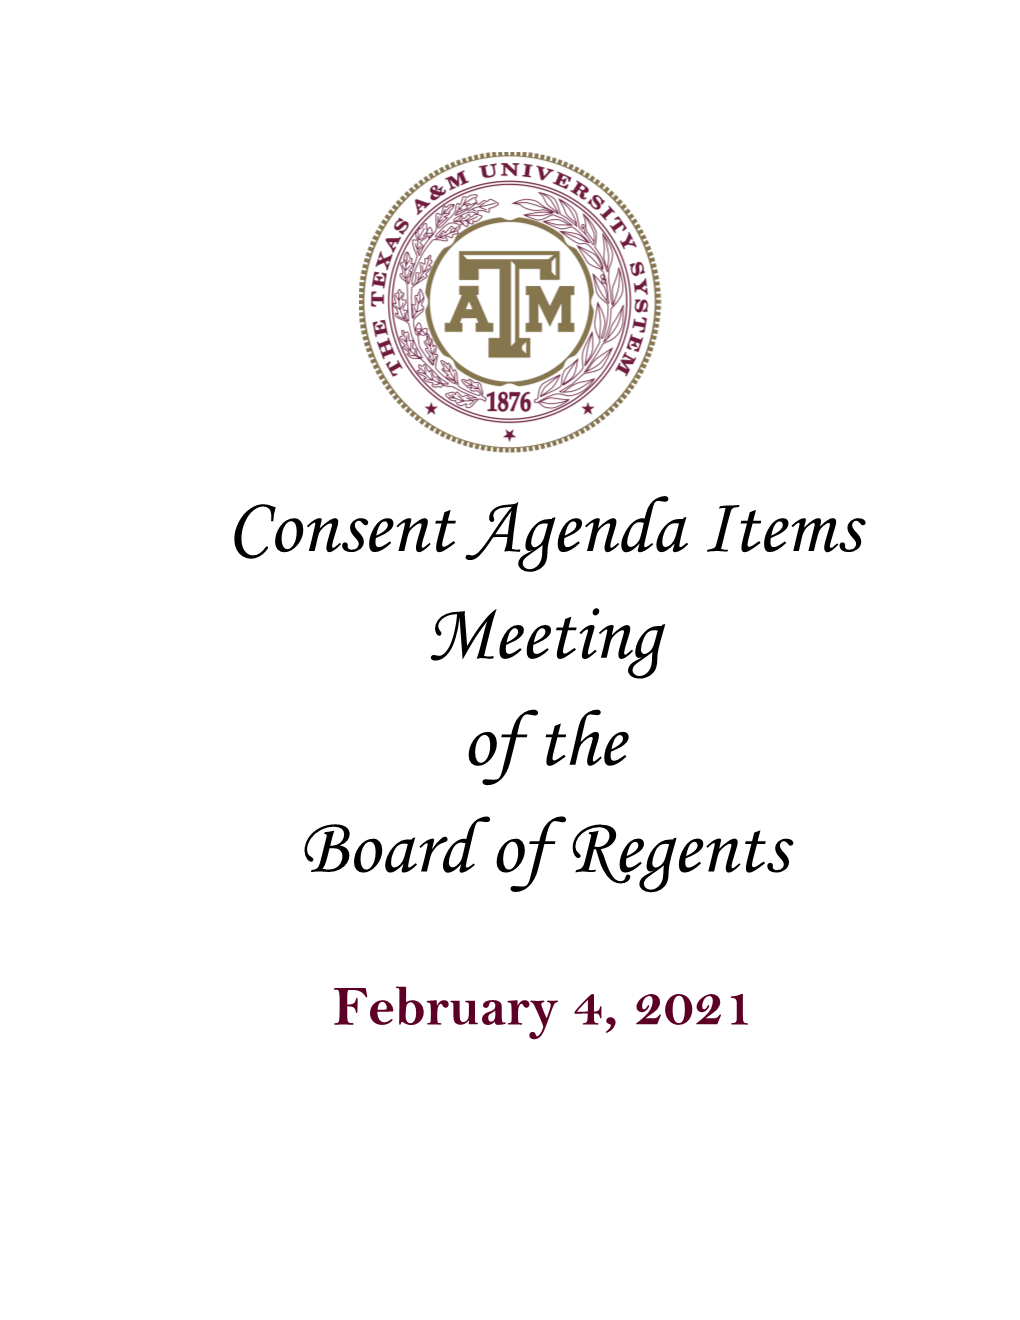 Consent Agenda Items Meeting of the Board of Regents